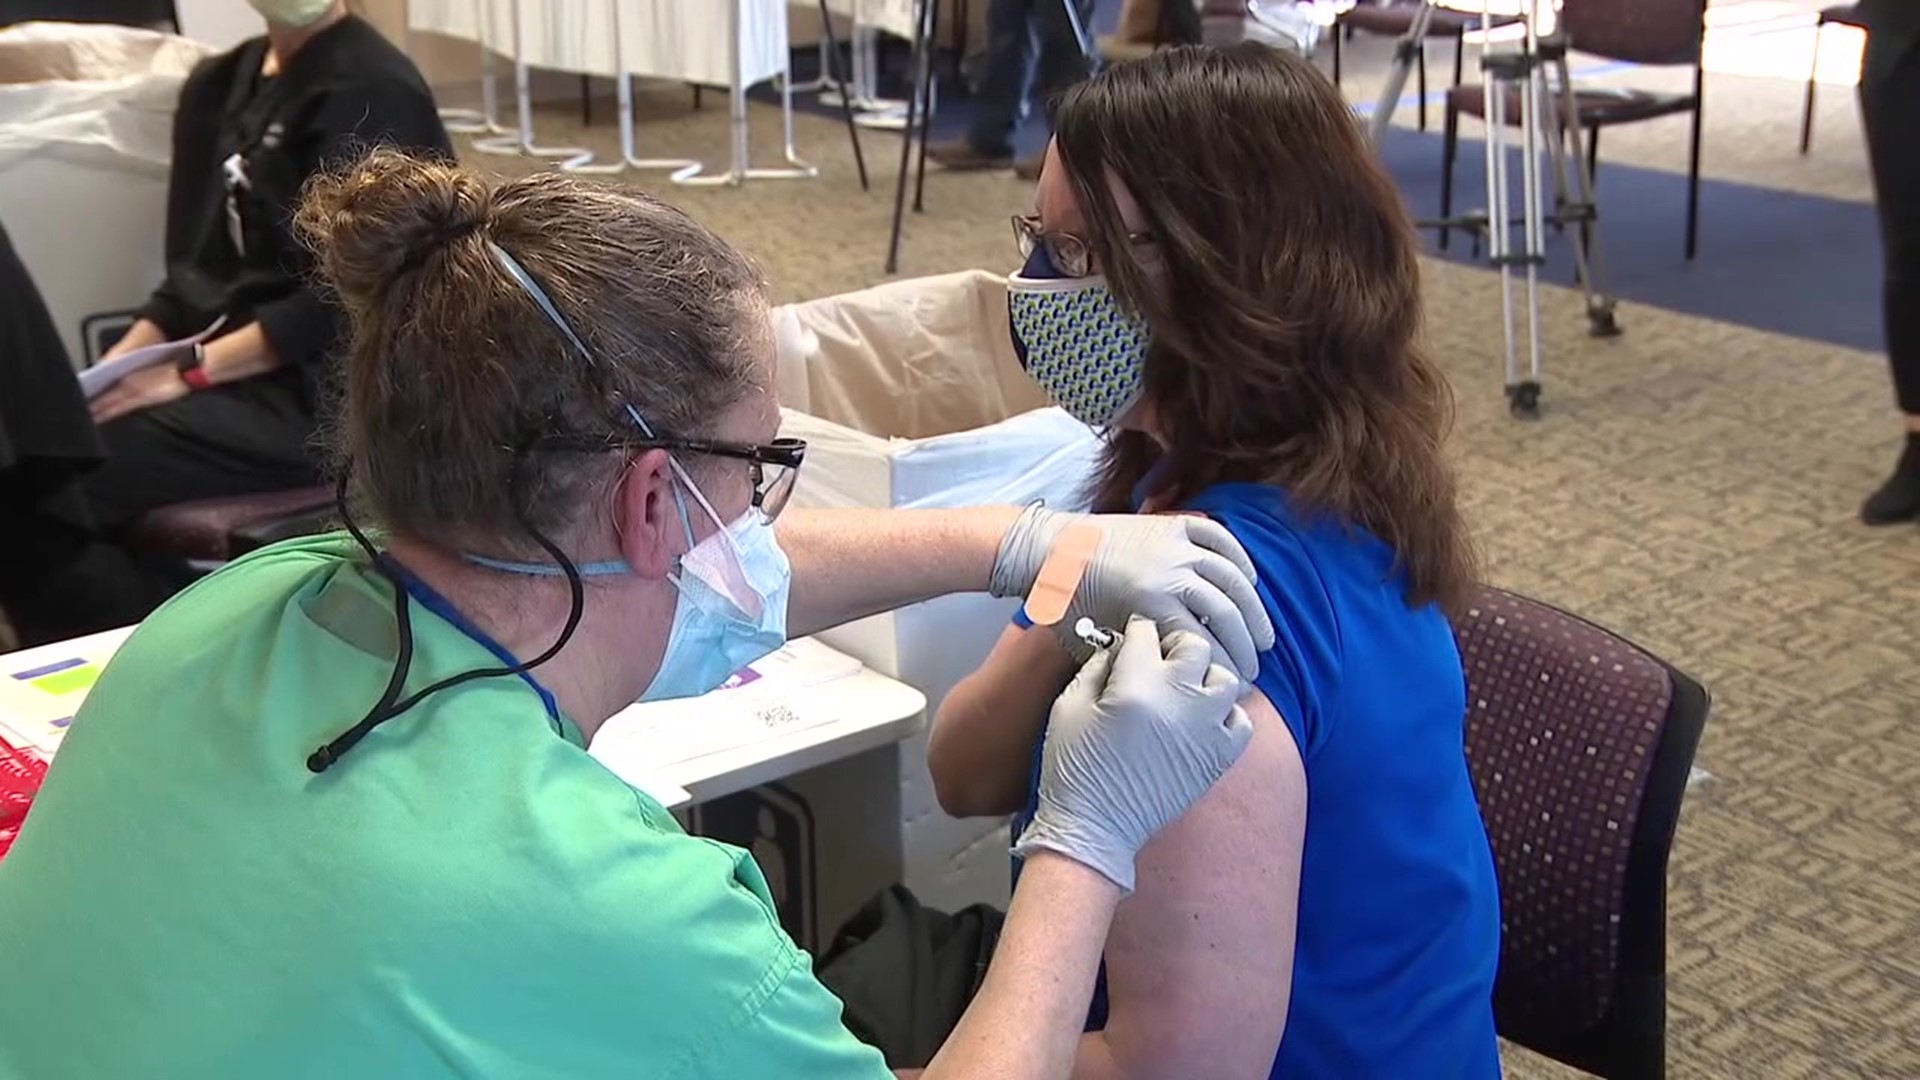 Monroe County is lagging behind with less than 10 percent of people in the county vaccinated. Doctors at Lehigh Valley Hospital-Pocono explain why.